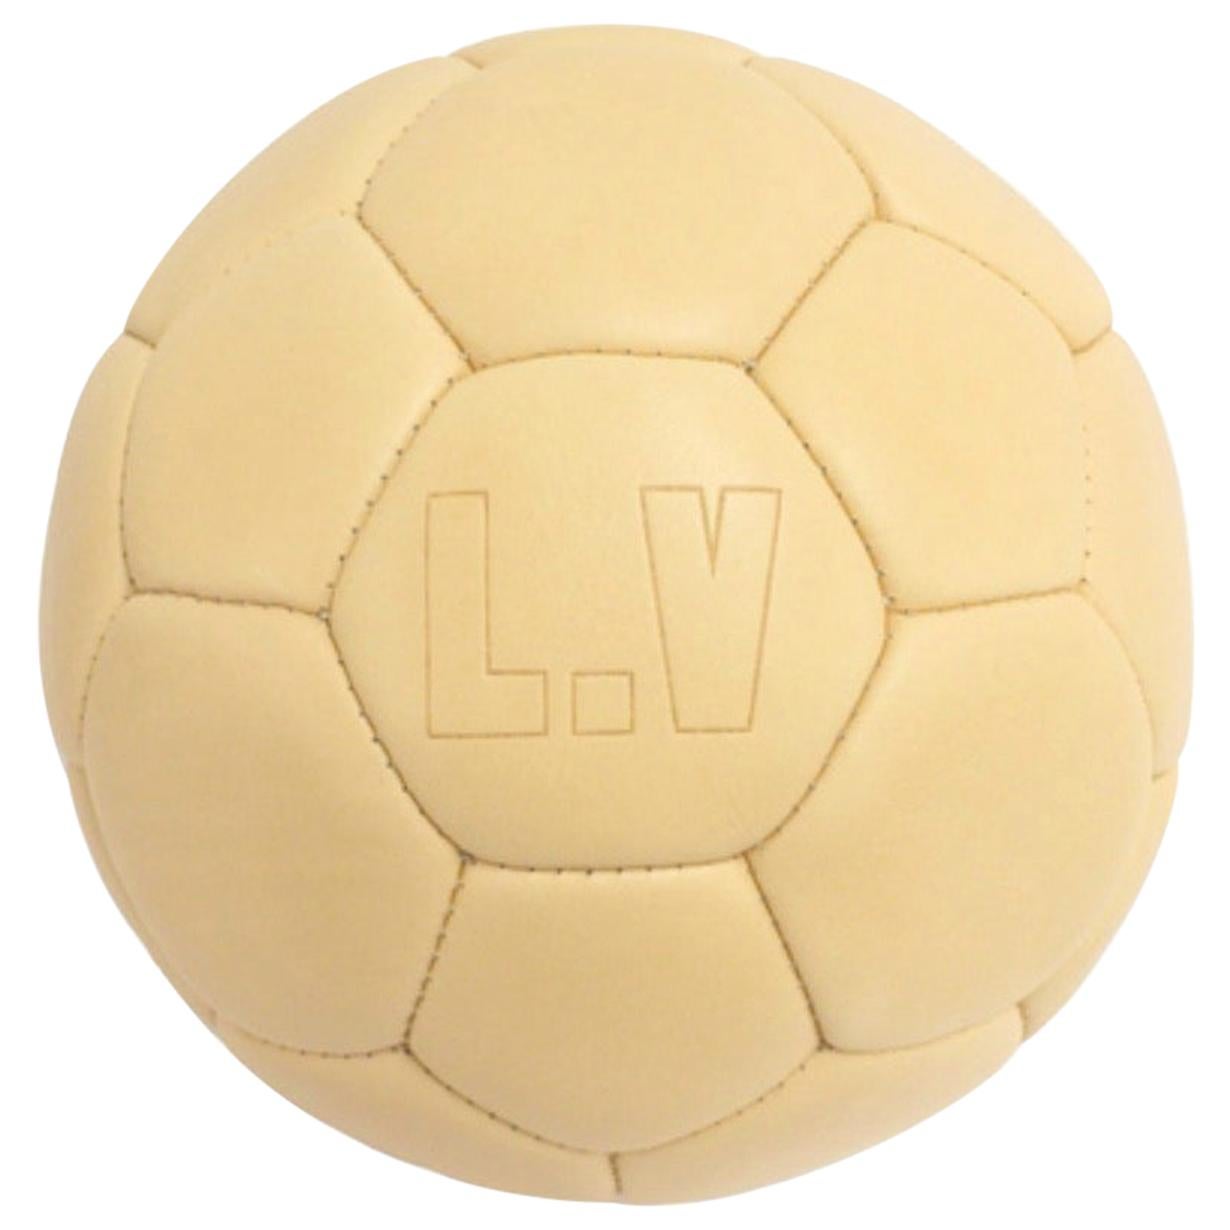 Louis Vuitton NEW LV Leather Men's Women Soccer Ball Leather Carrying Holster